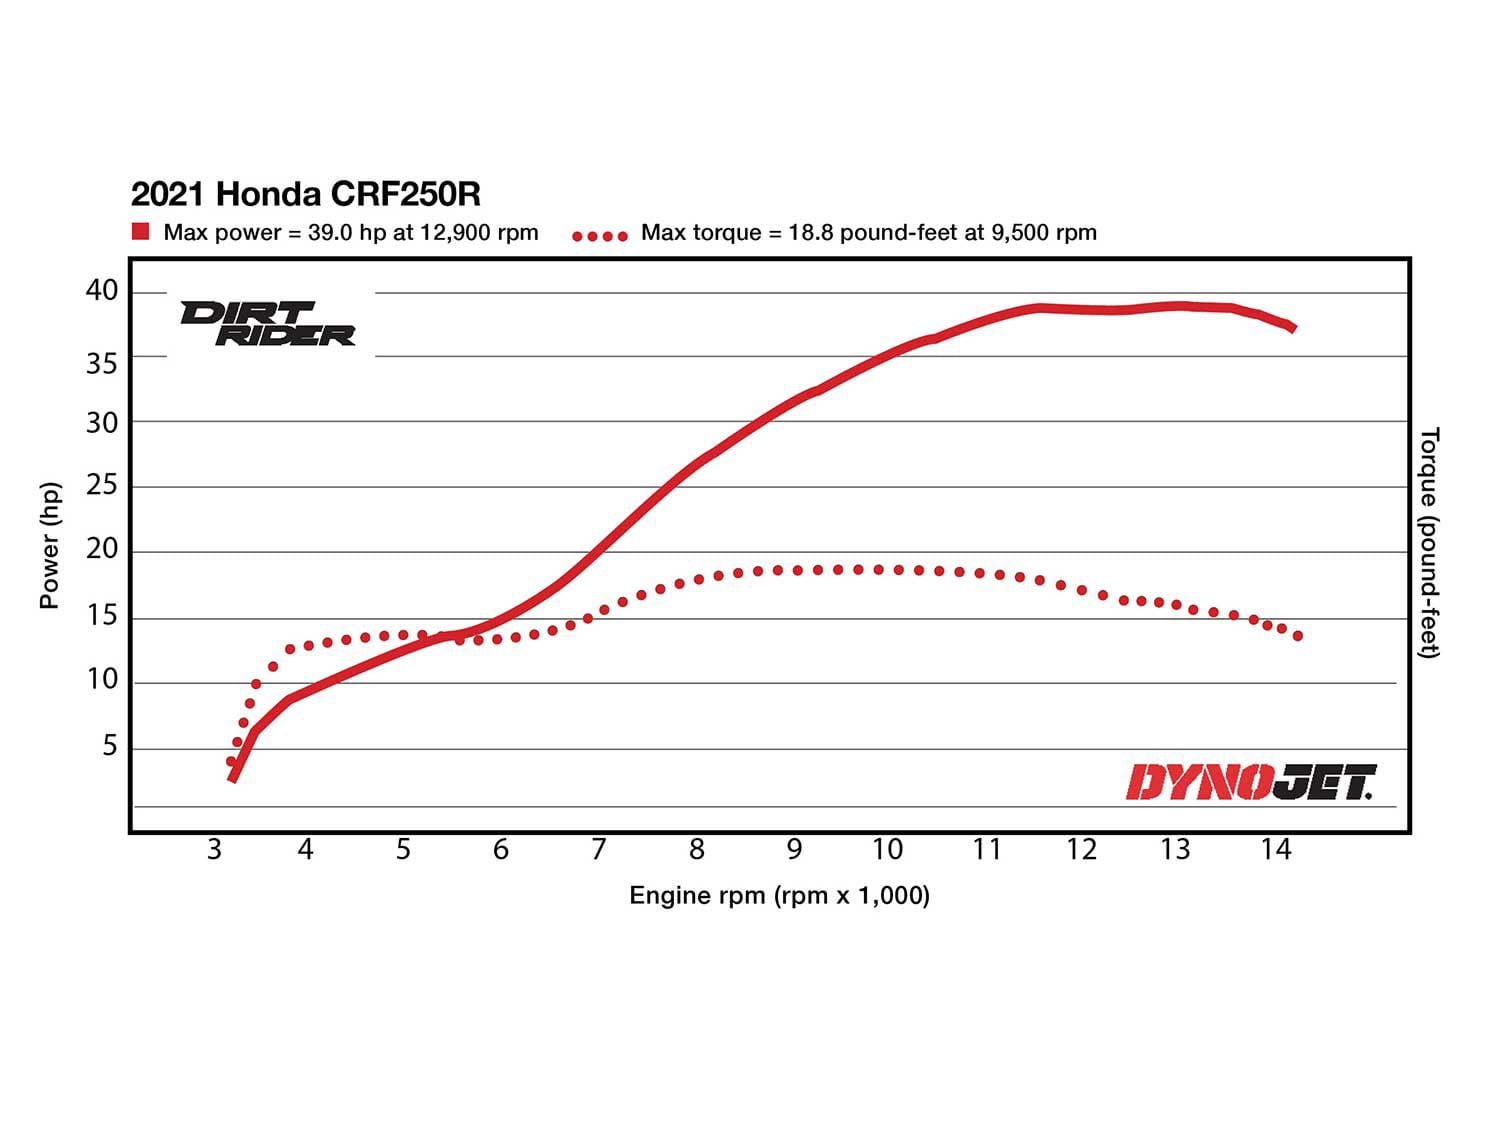 Cranking out 39.0 hp at 12,900 rpm and 18.8 pound-feet of torque at 9,500 rpm on the dyno, the CRF250R ties the Yamaha YZ250F for the least peak horsepower and ranks third in peak torque.